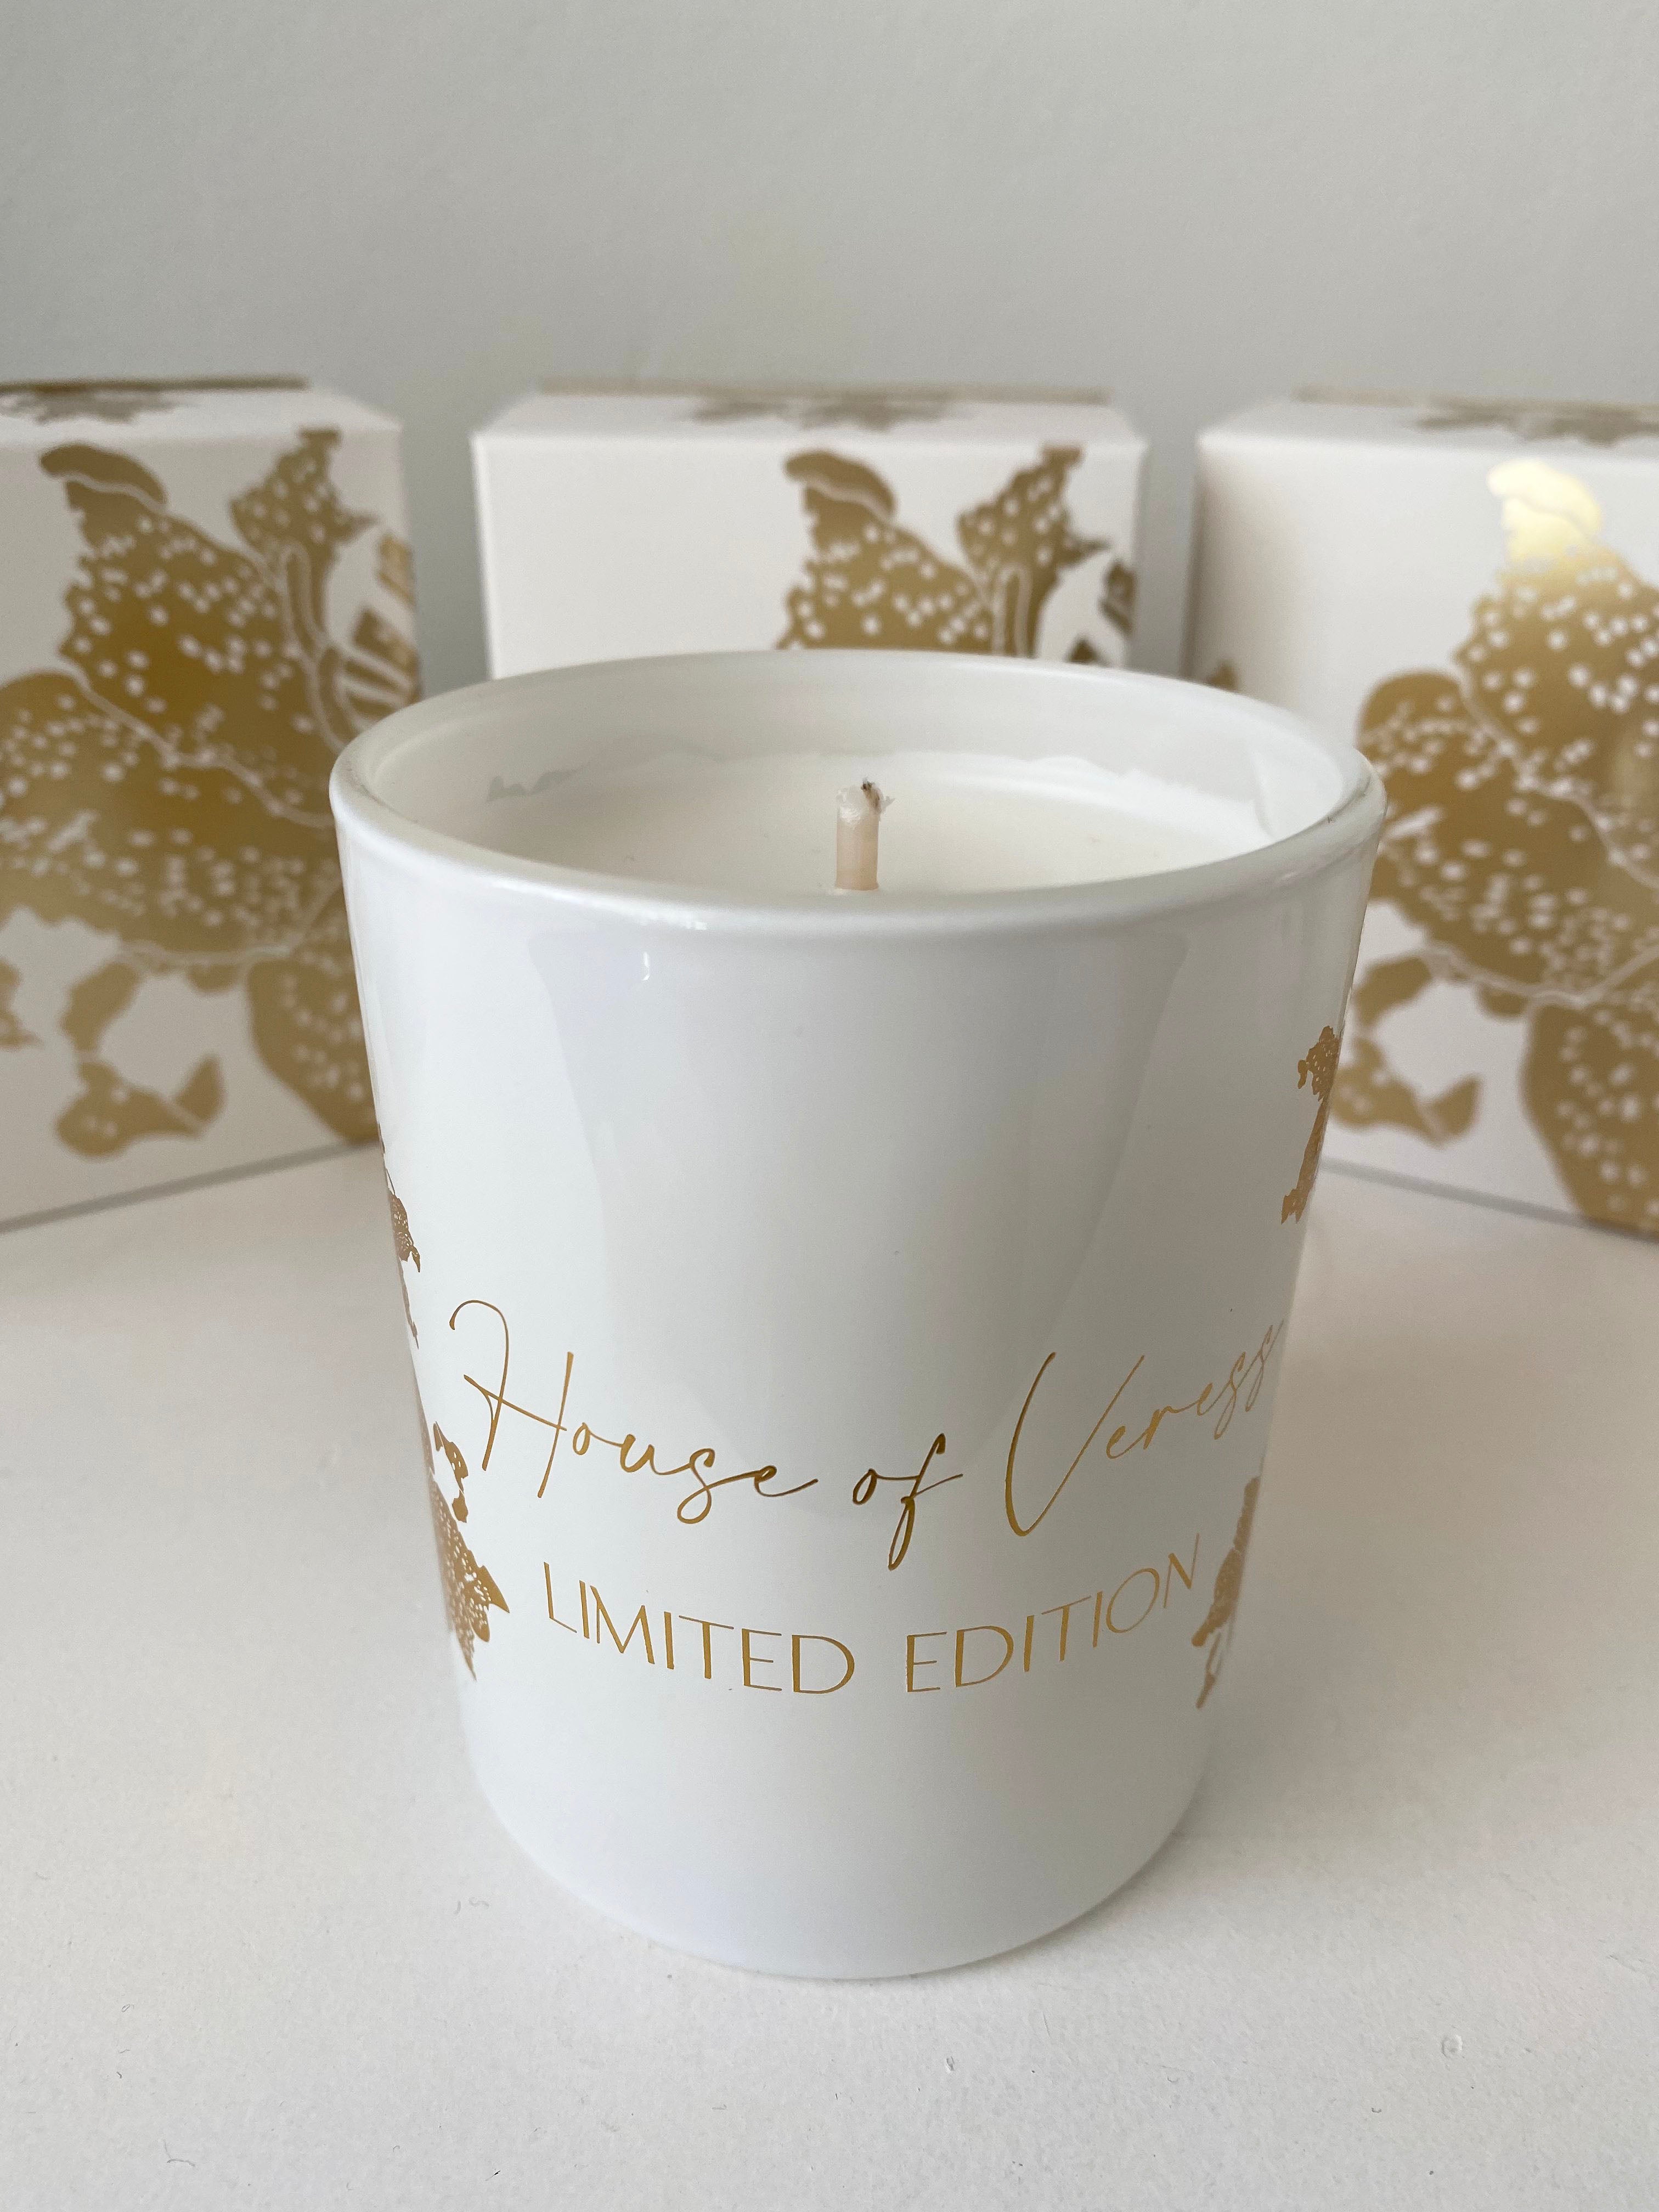 Custom blended candles. Hand poured and beautifully presented in our first release of our limited edition tiger lily gold foil print.